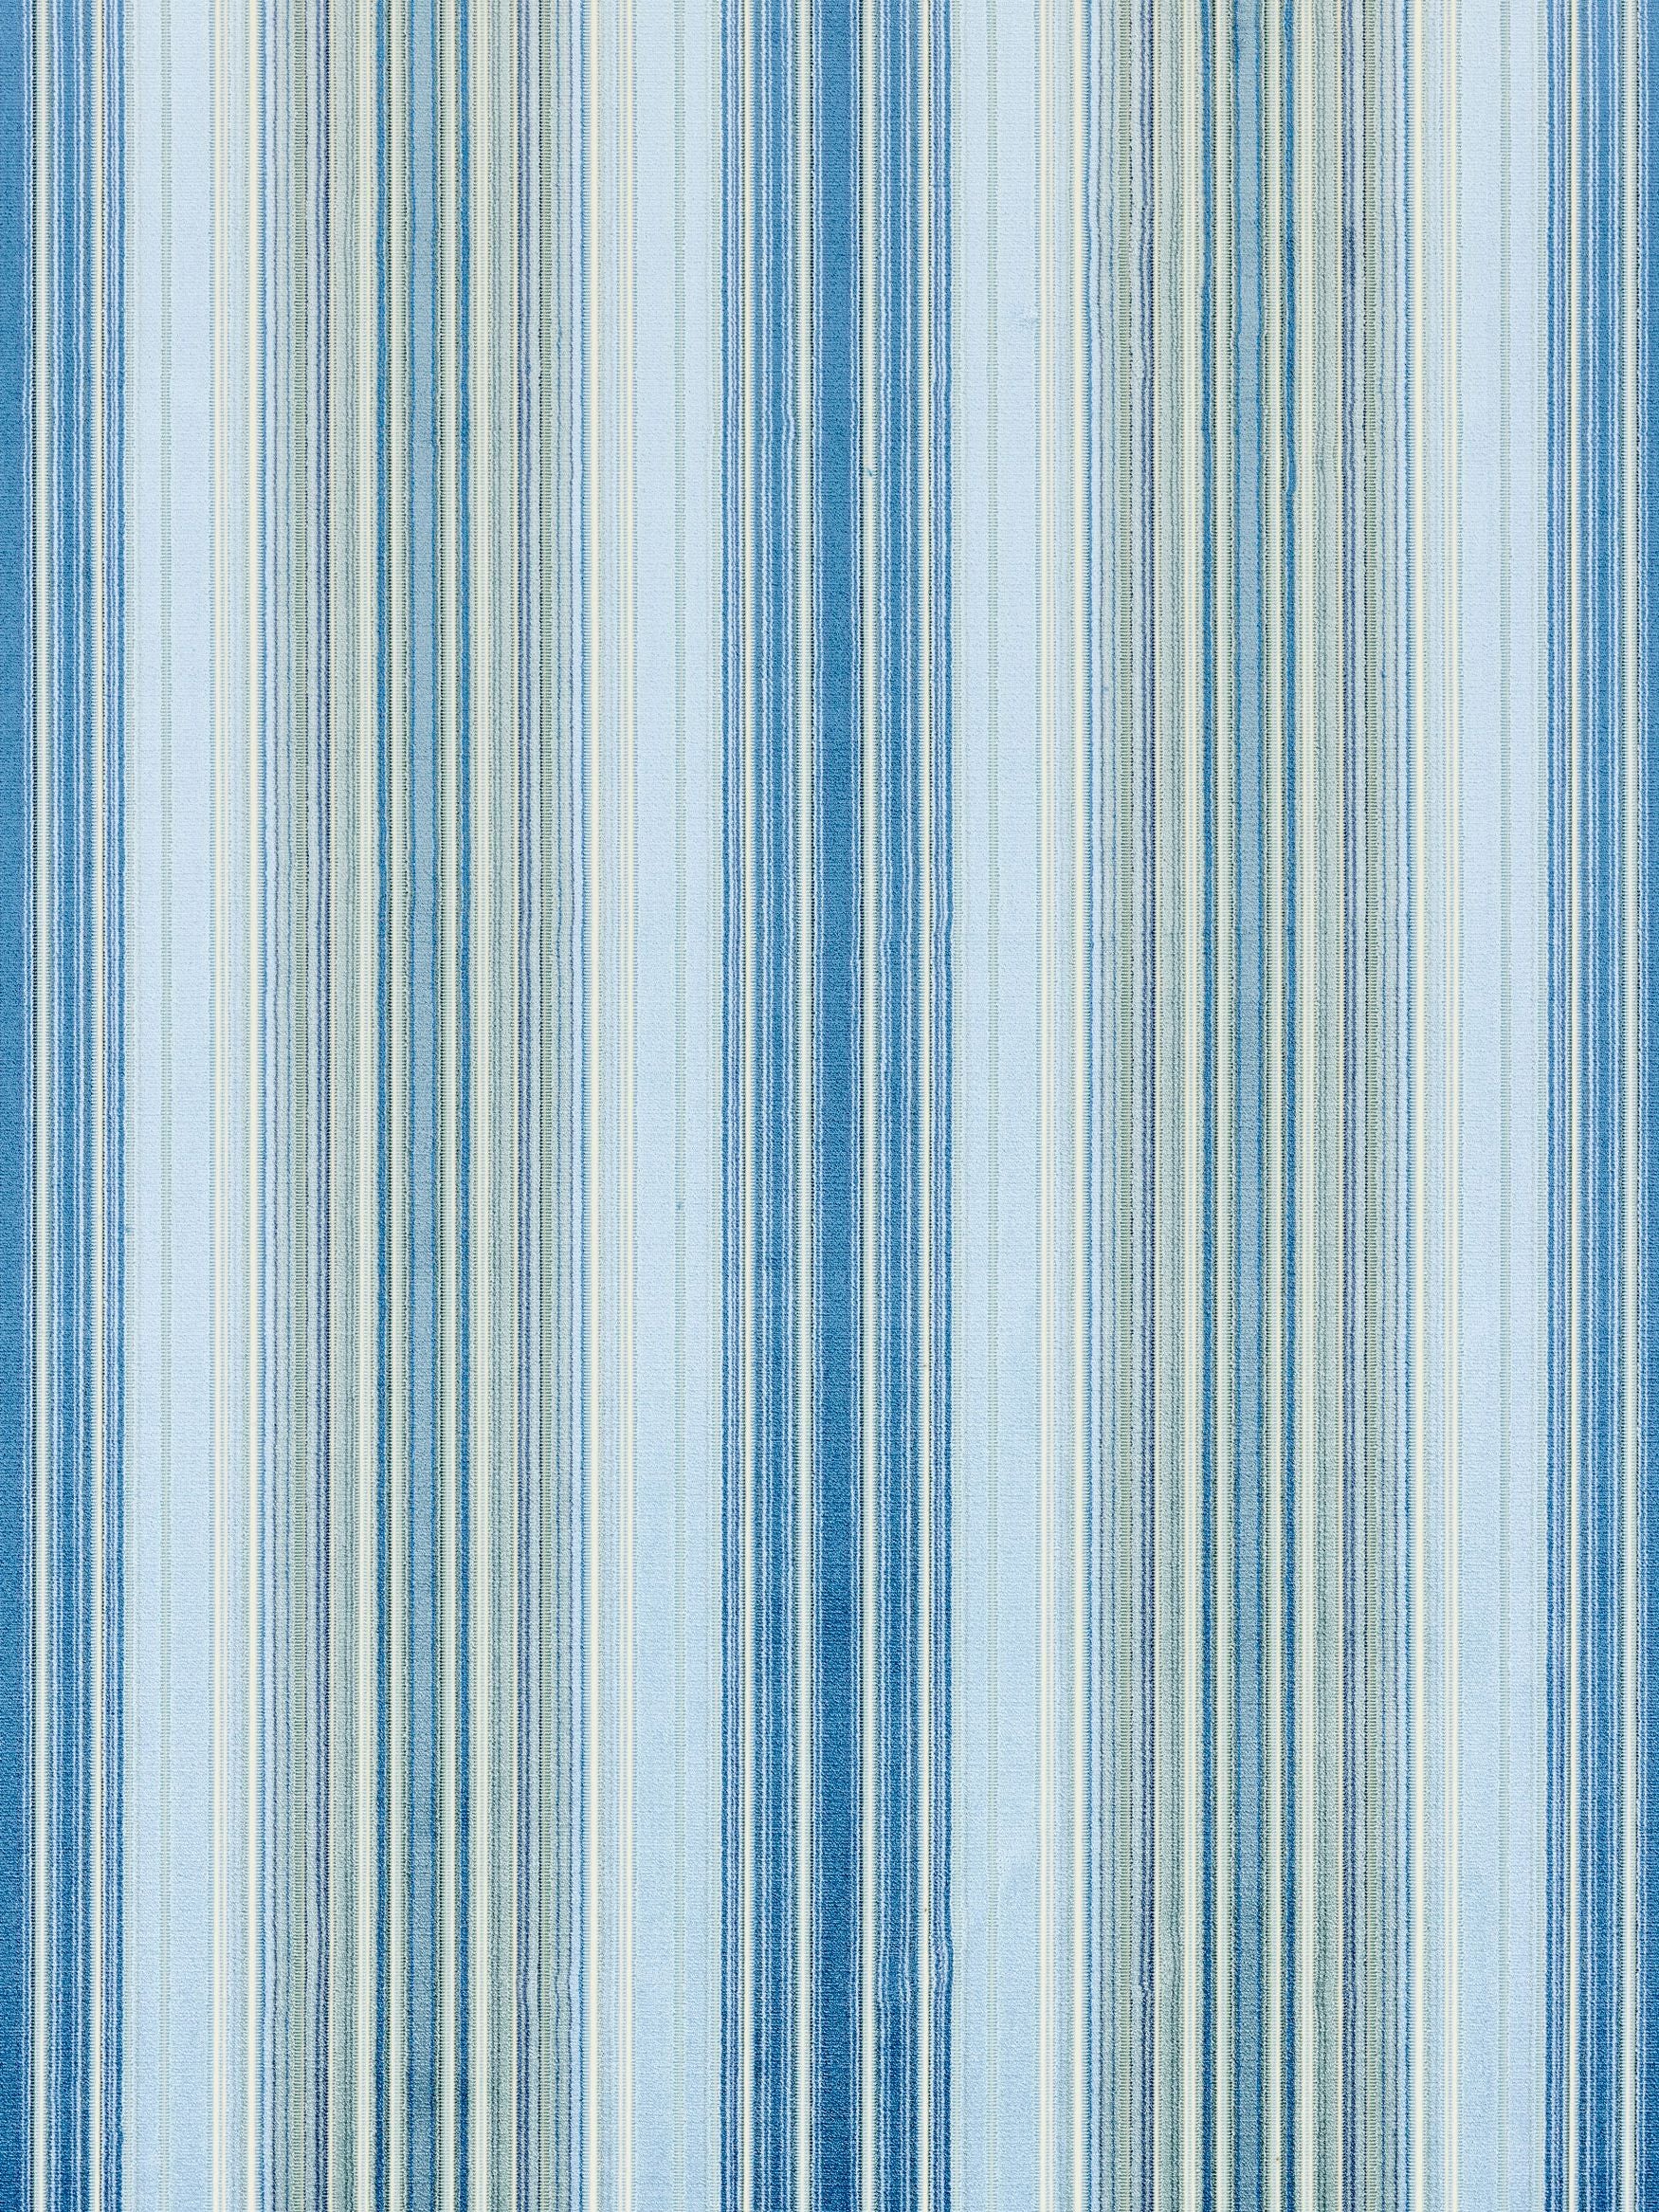 Timberlake Velvet fabric in blue jay color - pattern number JM 00020592 - by Scalamandre in the Old World Weavers collection